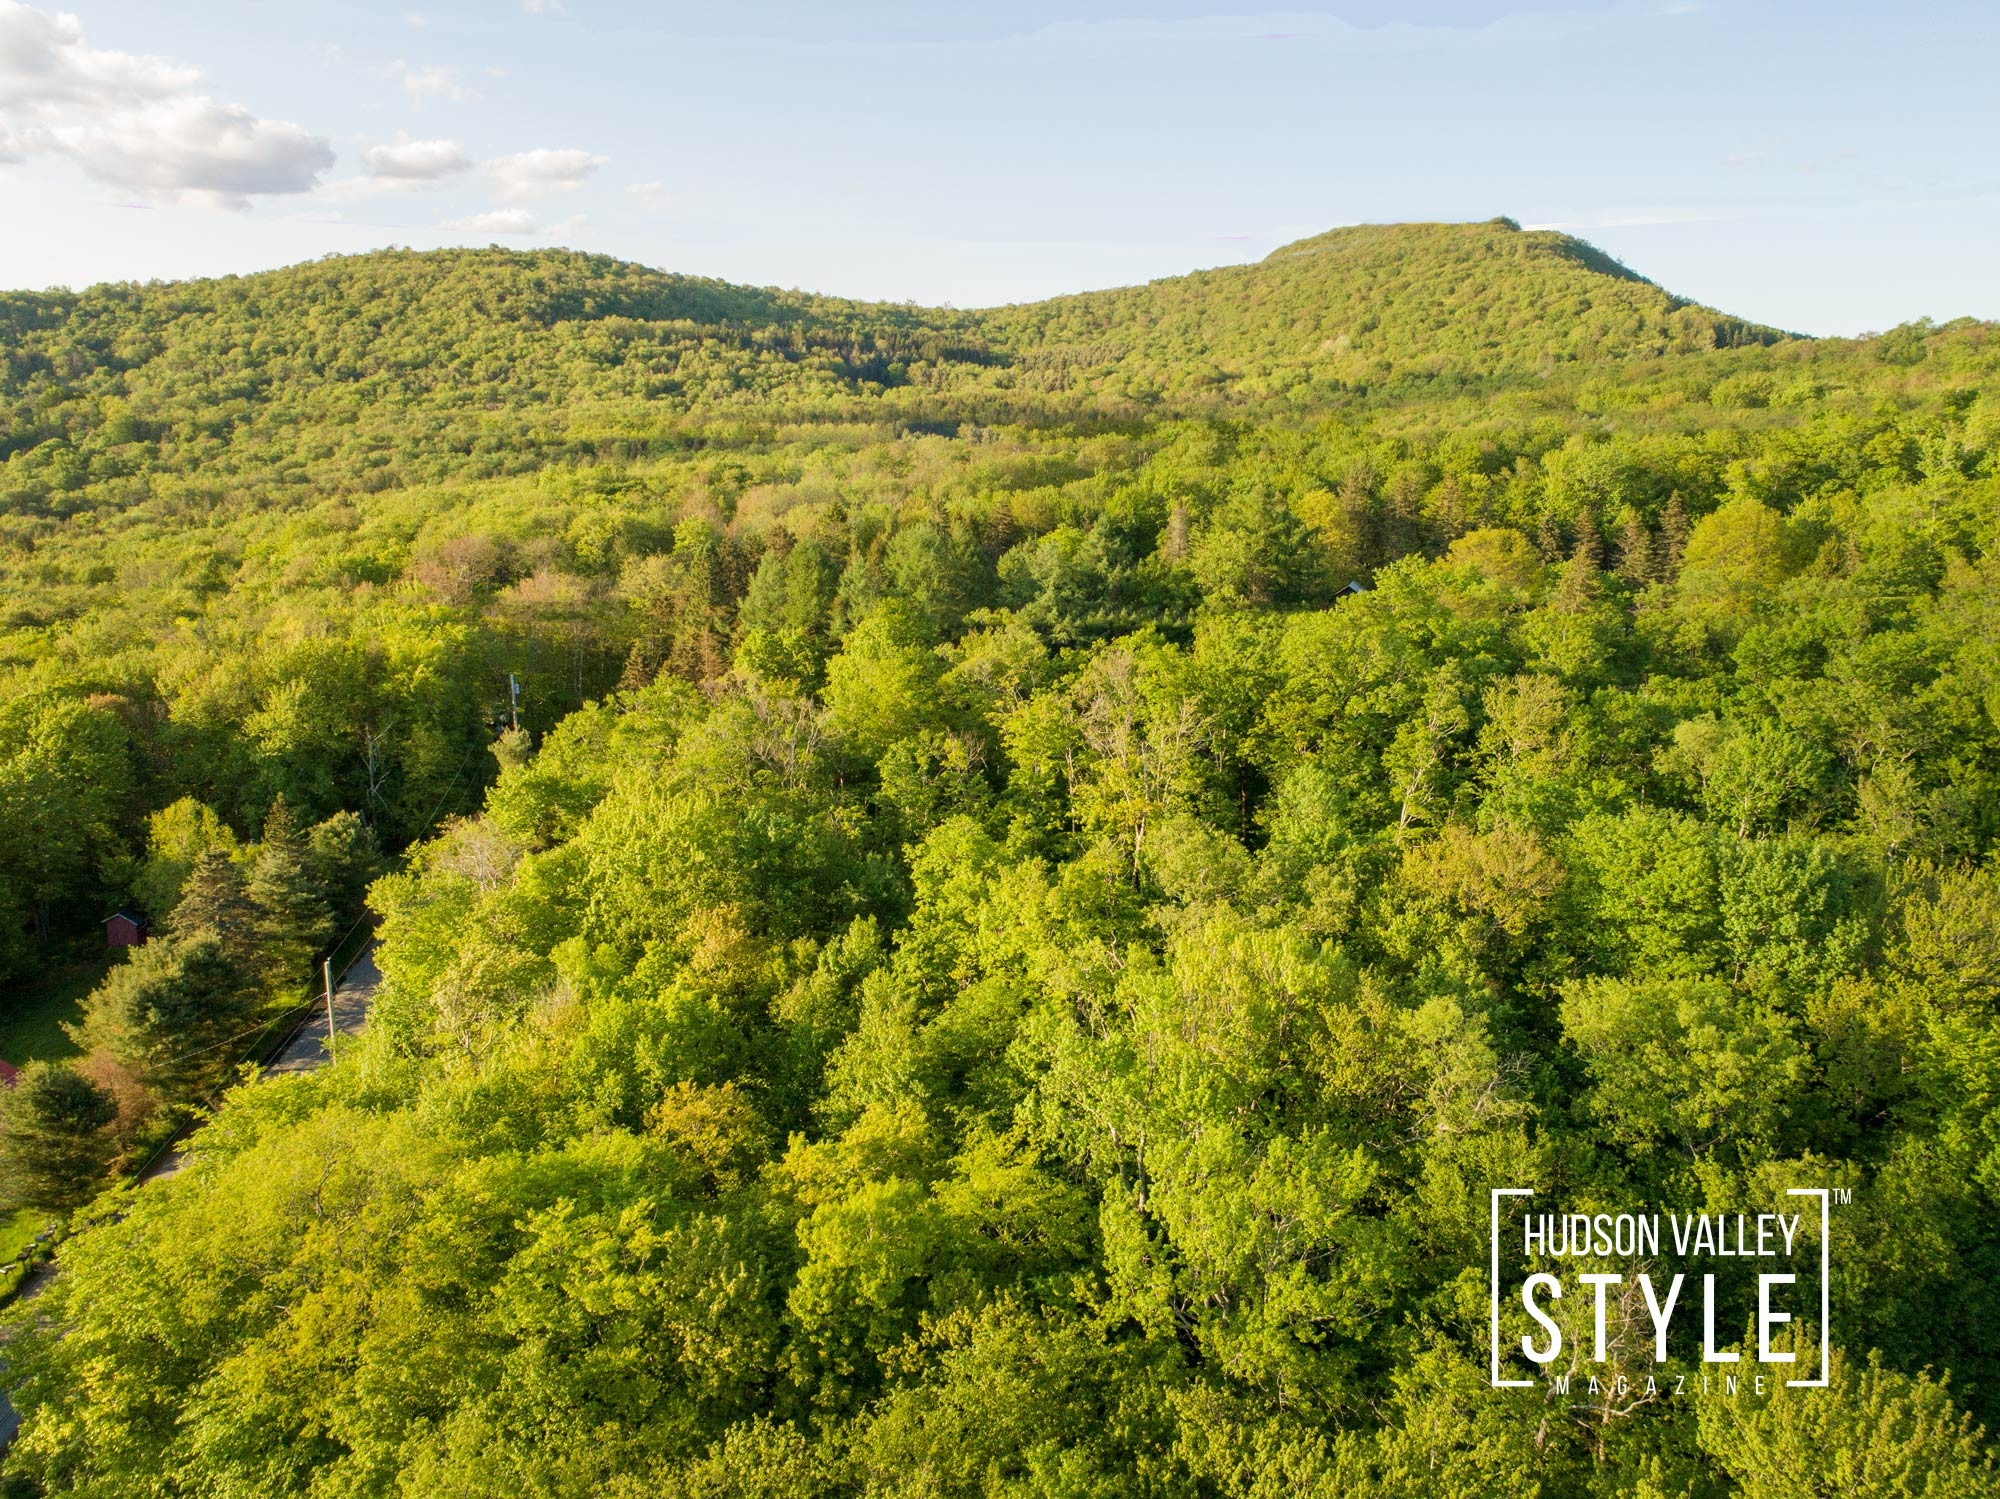 Discover a Cozy Modern Rustic Airbnb Cabin With Stunning Views of the Catskill Mountains – Presented by Alluvion Vacations – Hudson Valley Vacation Rental Management – Airbnb Photography by Maxwell Alexander / Alluvion Media